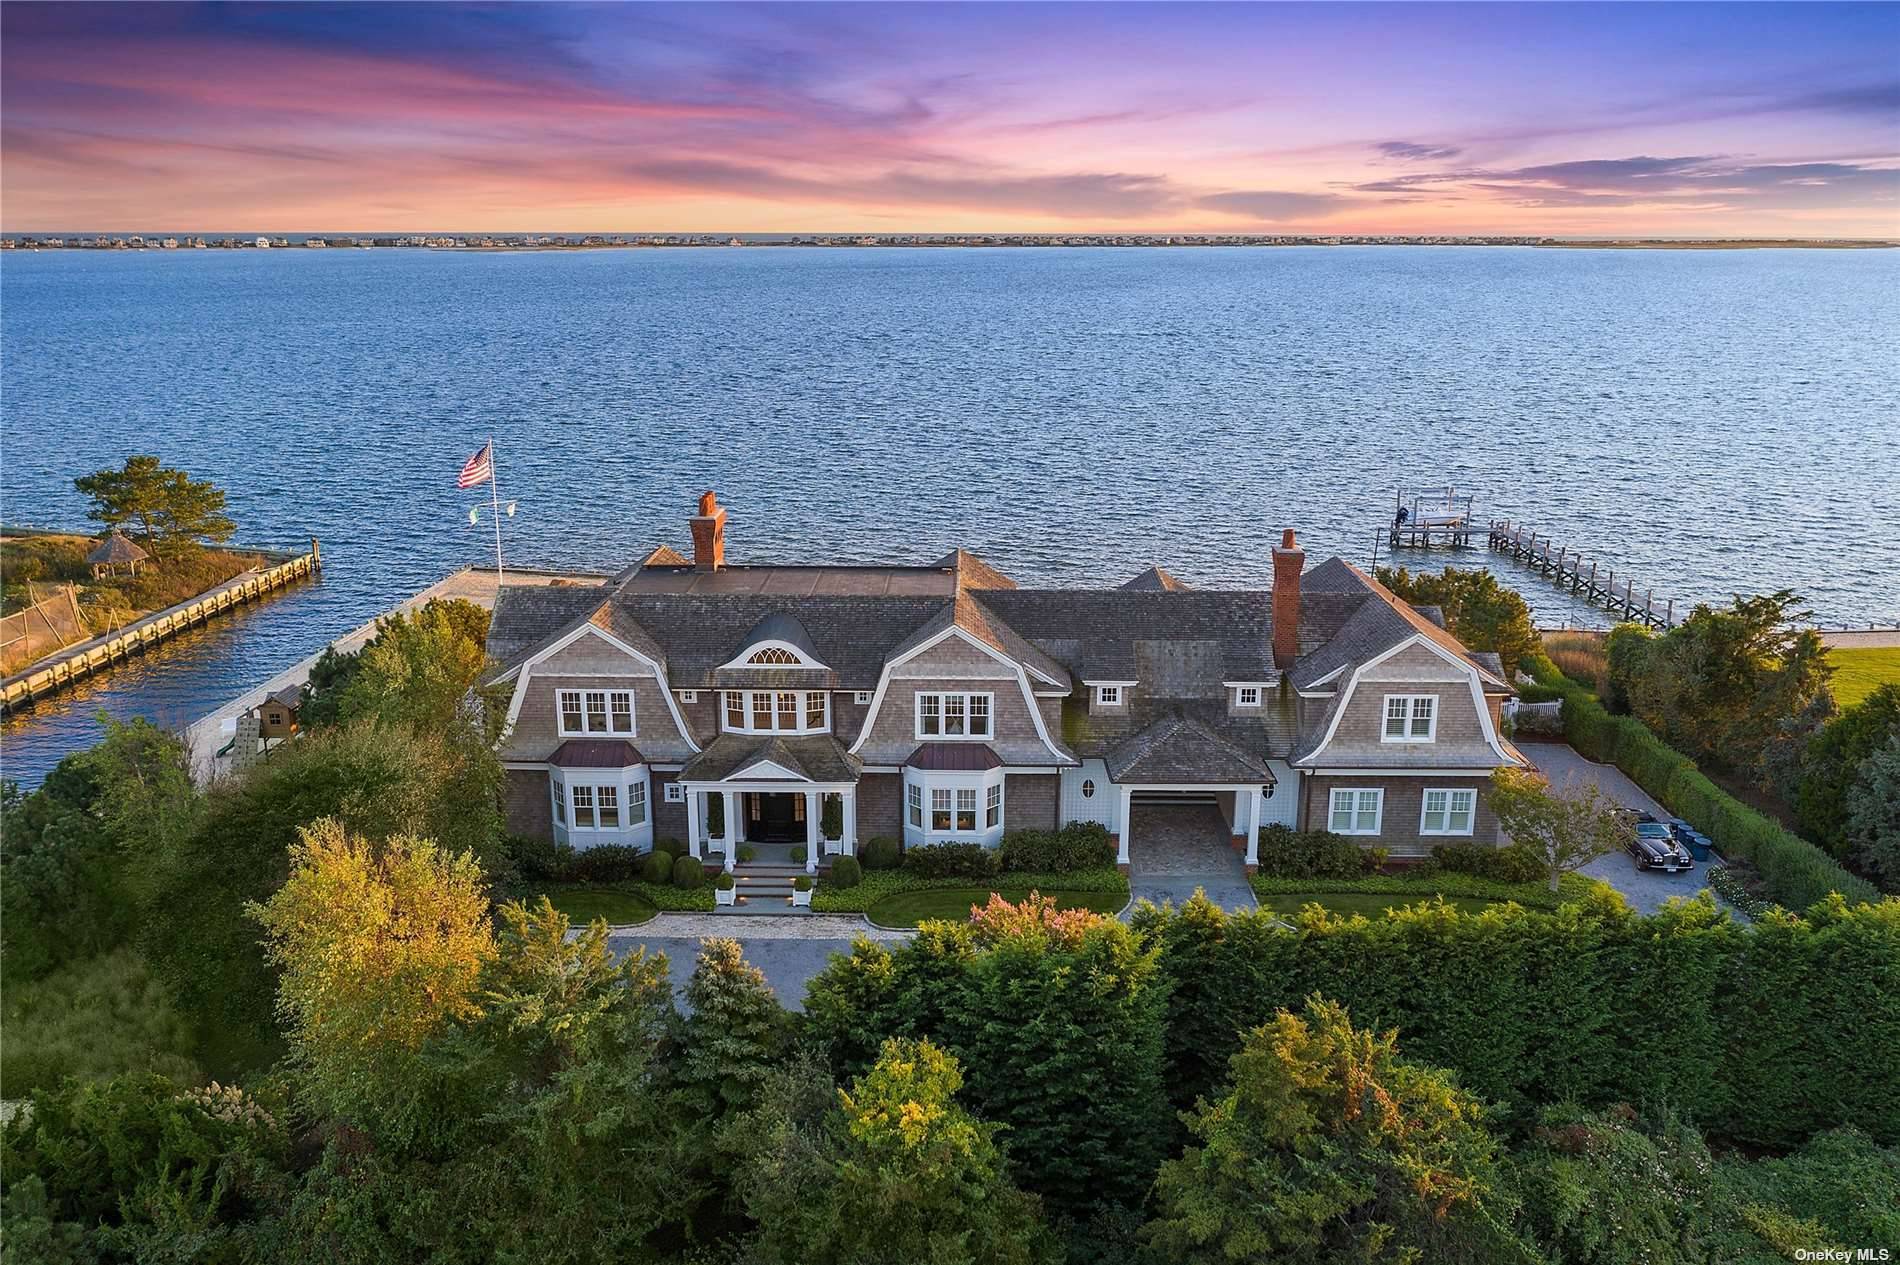 ONE OF THE MOST BEAUTIFUL amp ; REFINED HOMES IN ALL THE HAMPTONS This Open Bayfront Beauty, with Spectacular Sunsets, Sits directly on Moriches Bay.